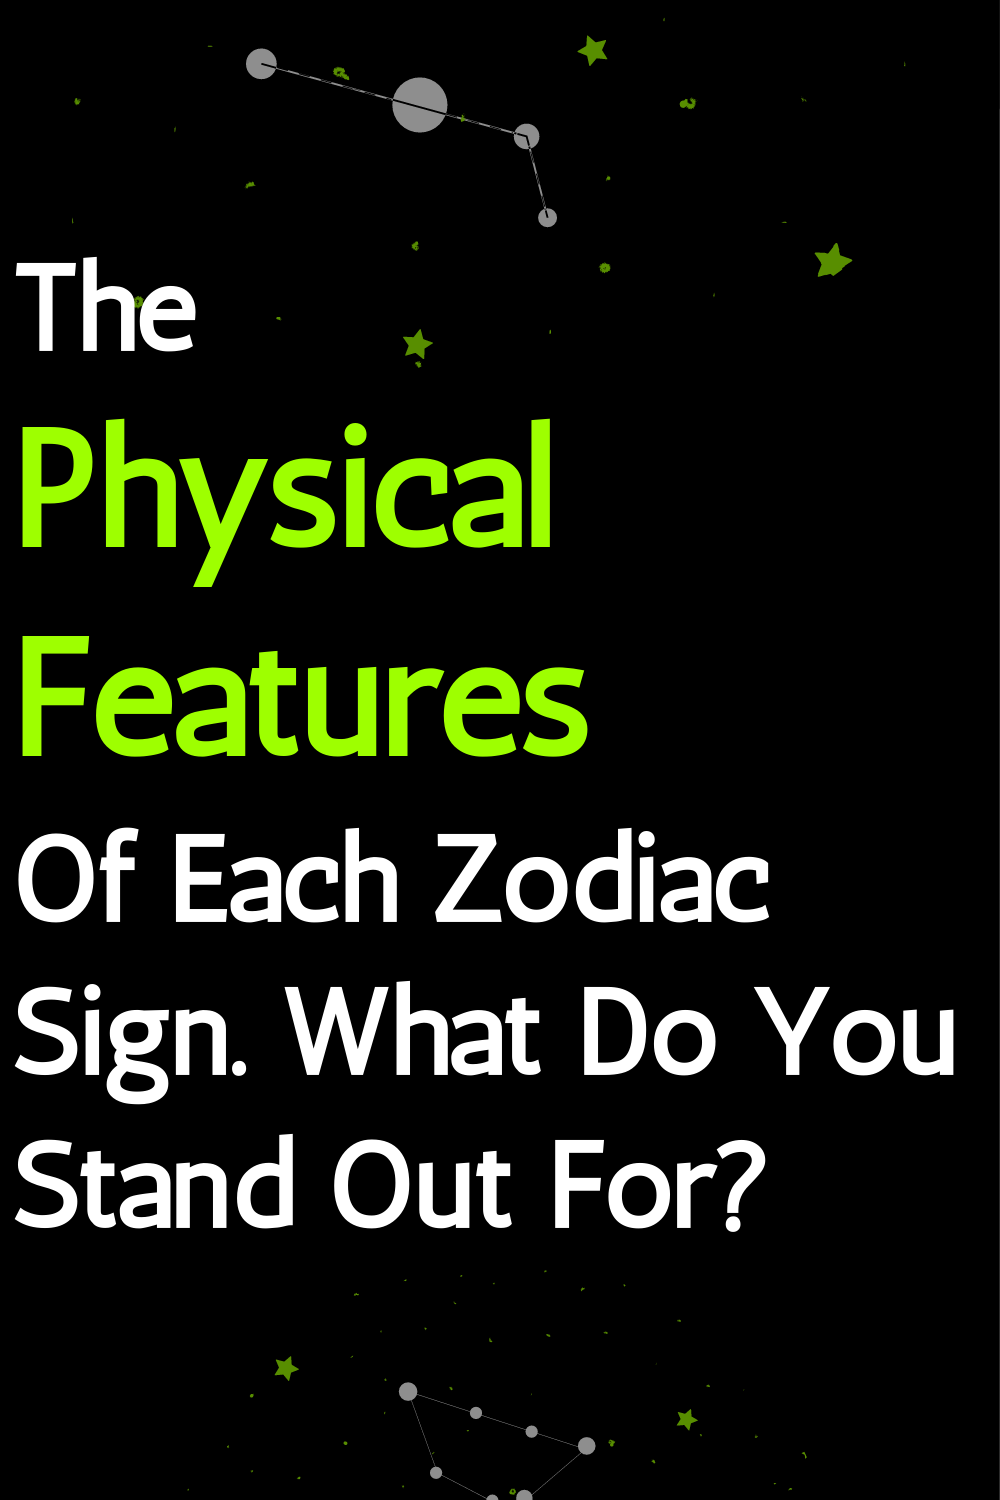 The Physical Features Of Each Zodiac Sign. What Do You Stand Out For?